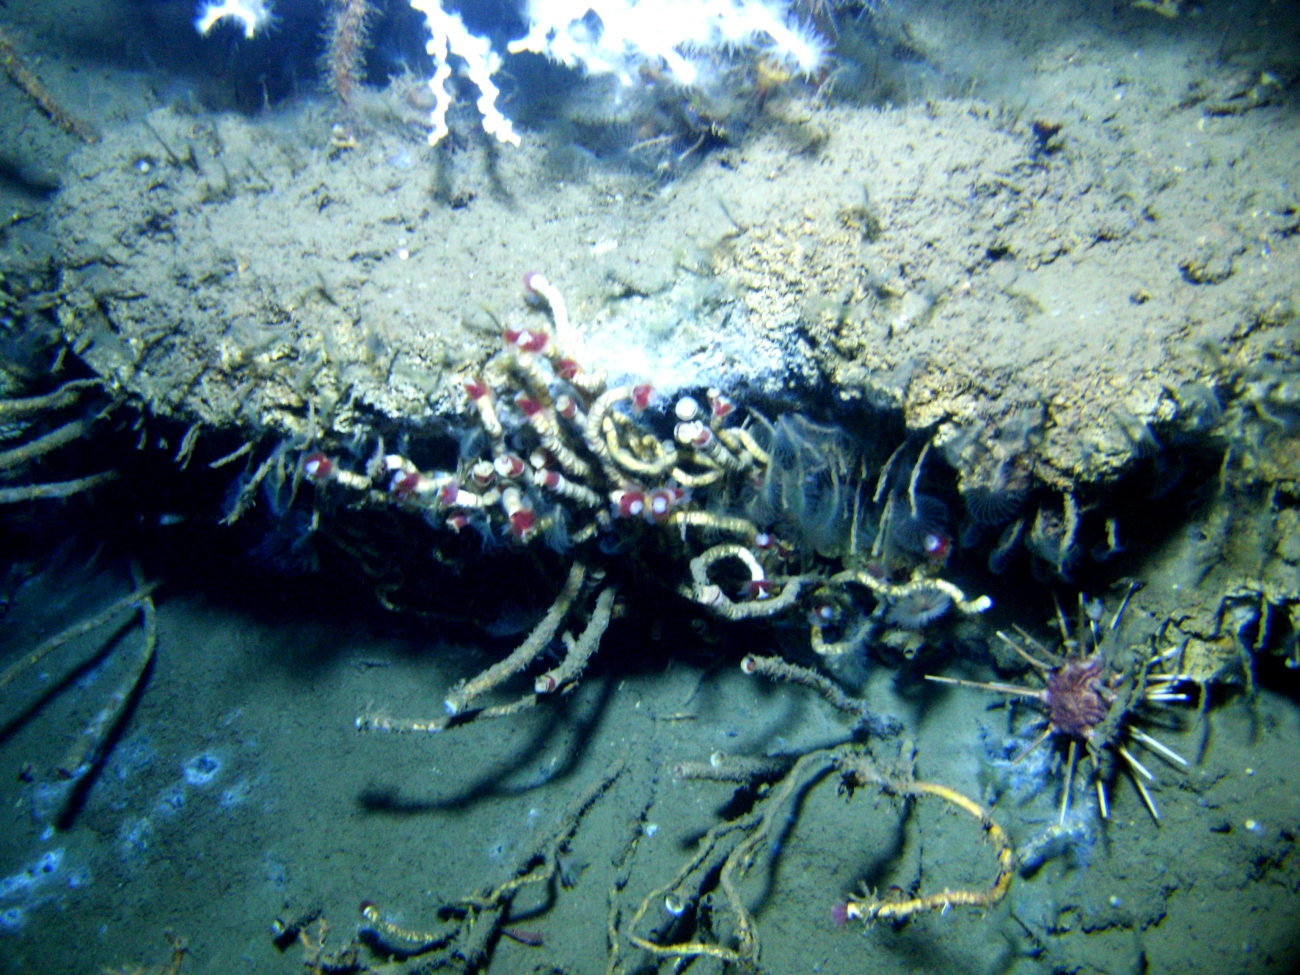 An outcrop in a cold seep area with lamellibrachian tube worms with red tips and smaller tube worms with feeding tentacles extended